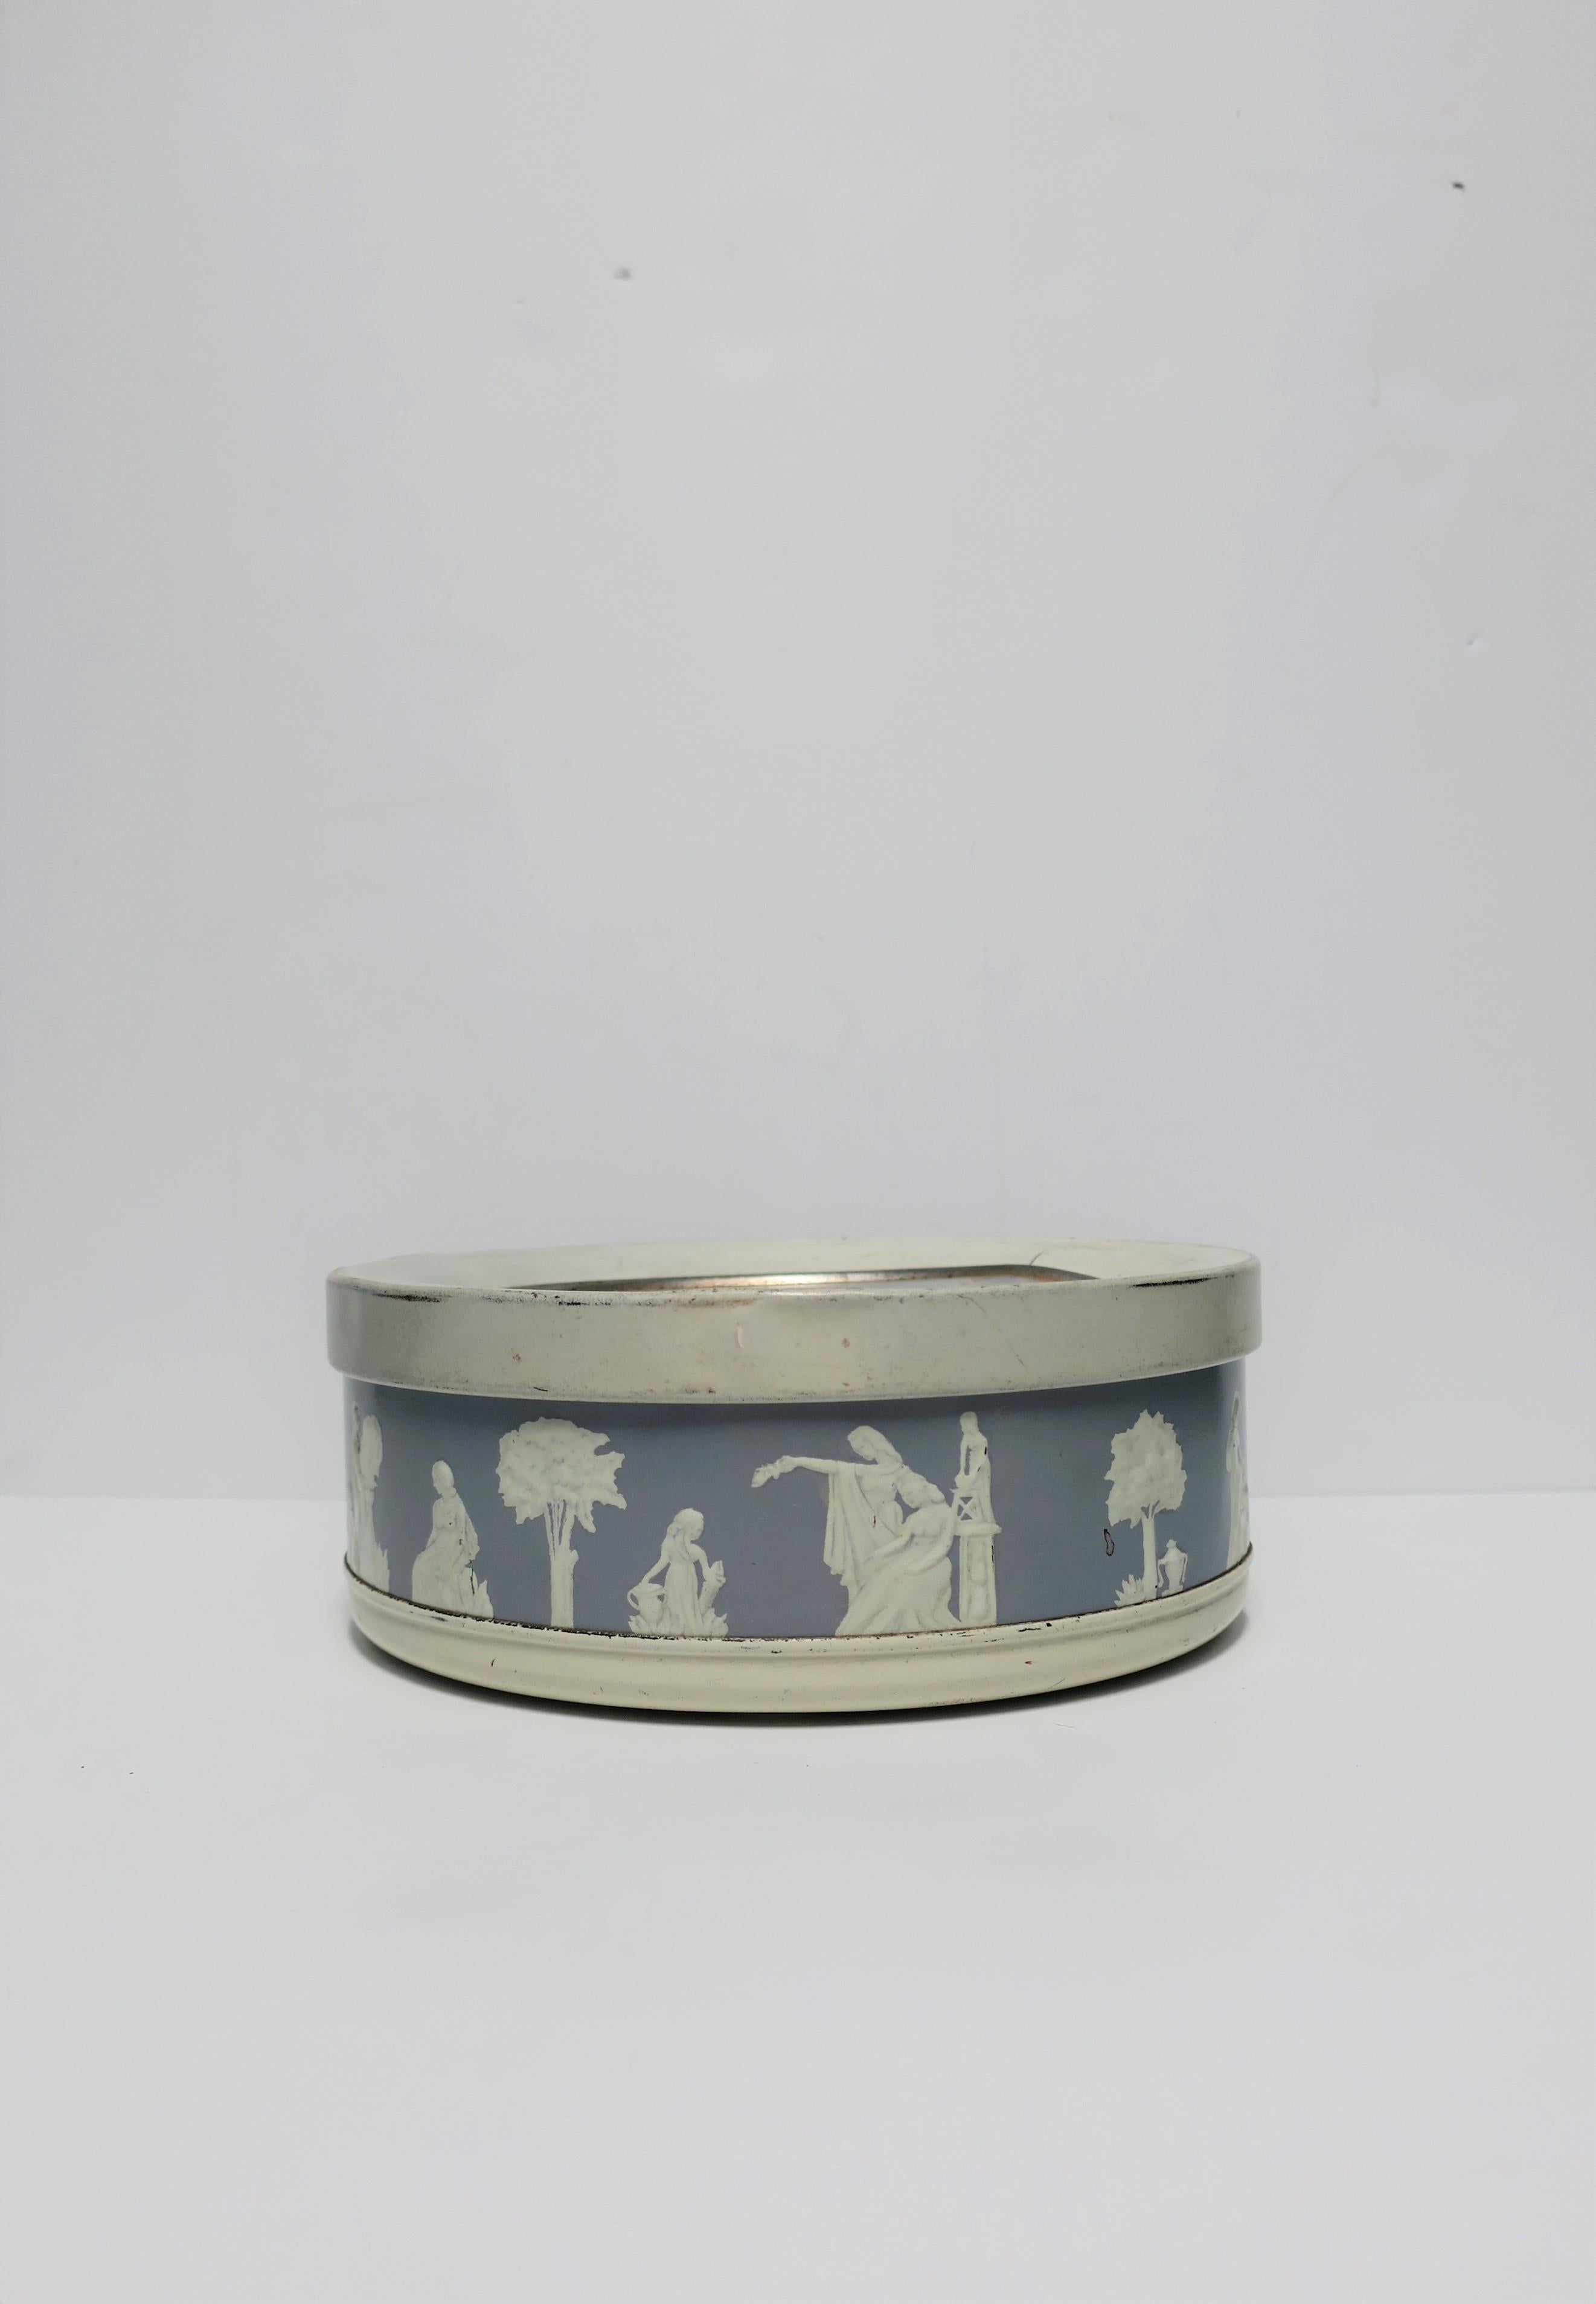 Cold-Painted Neoclassical Round Box in the Style of the Wedgwood For Sale